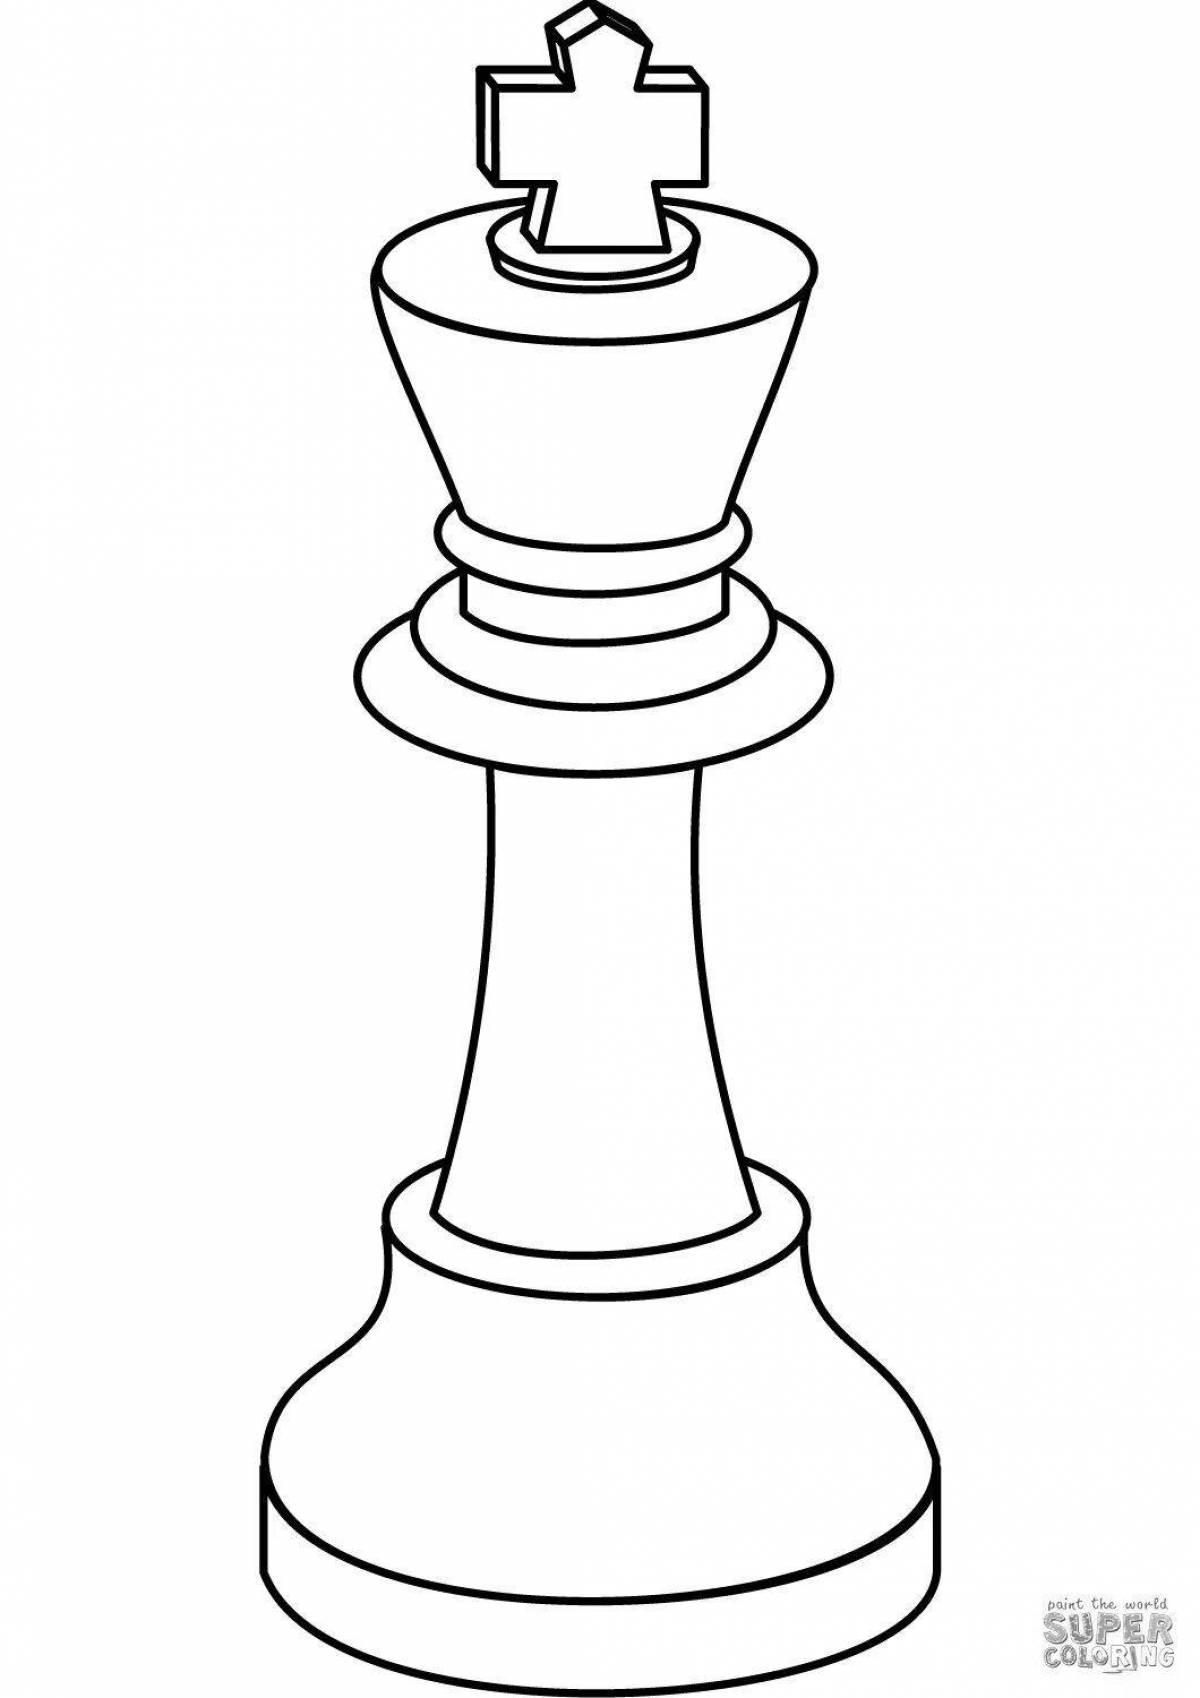 Coloring book fascinating chess pieces